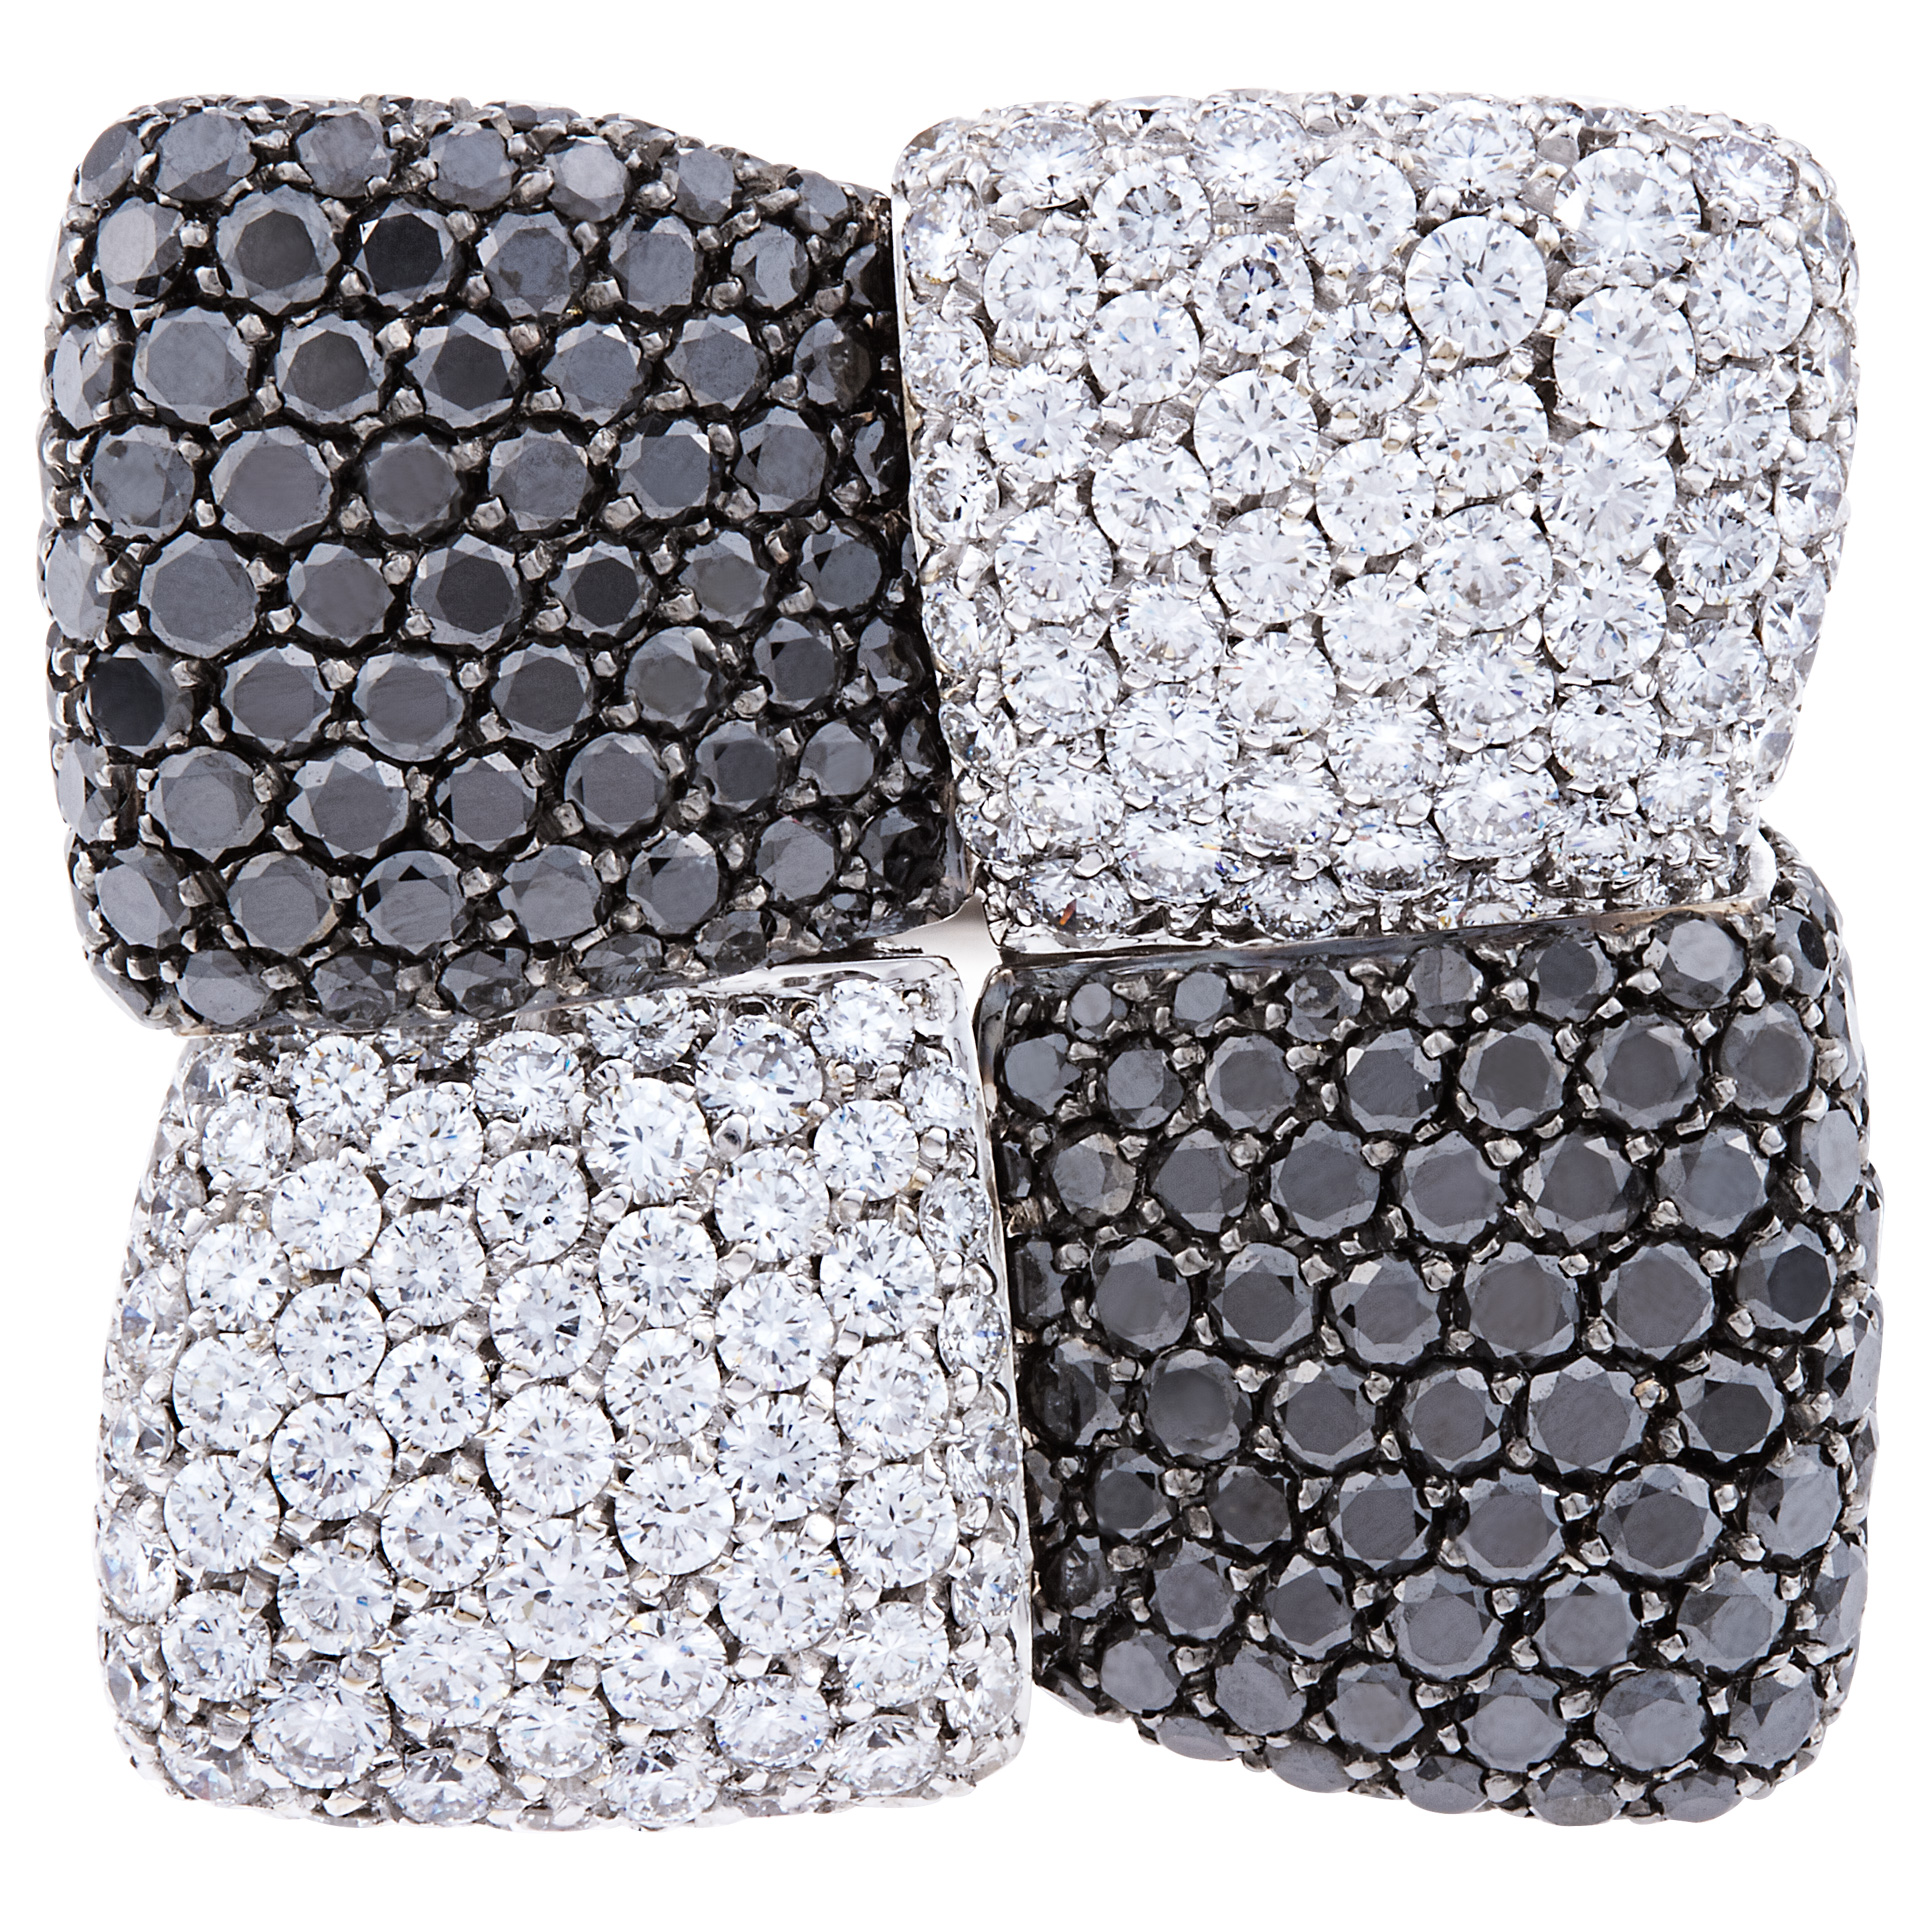 Palmiero J.D. 18k white gold ring with white and black diamonds. approx. 14.18 carats